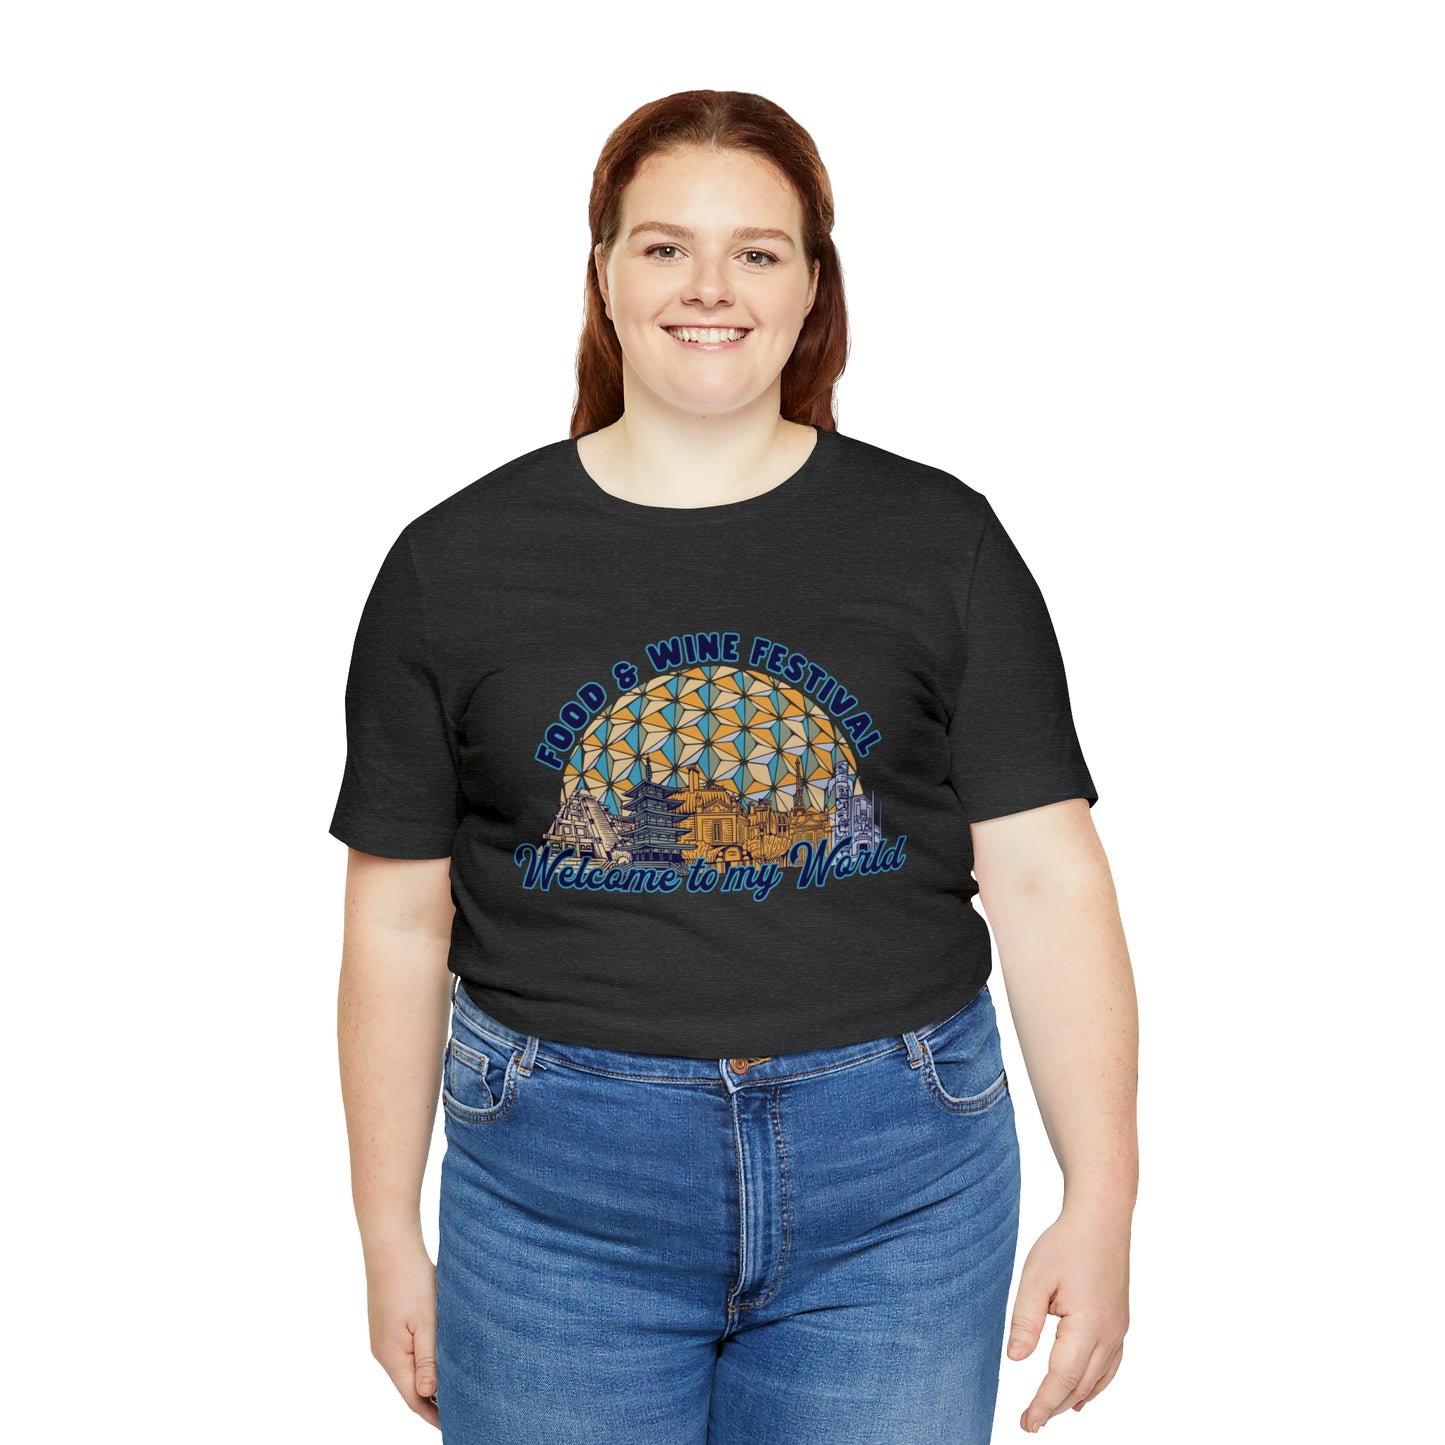 Welcome to my World EPCOT Food & Wine Festival - Adult Unisex